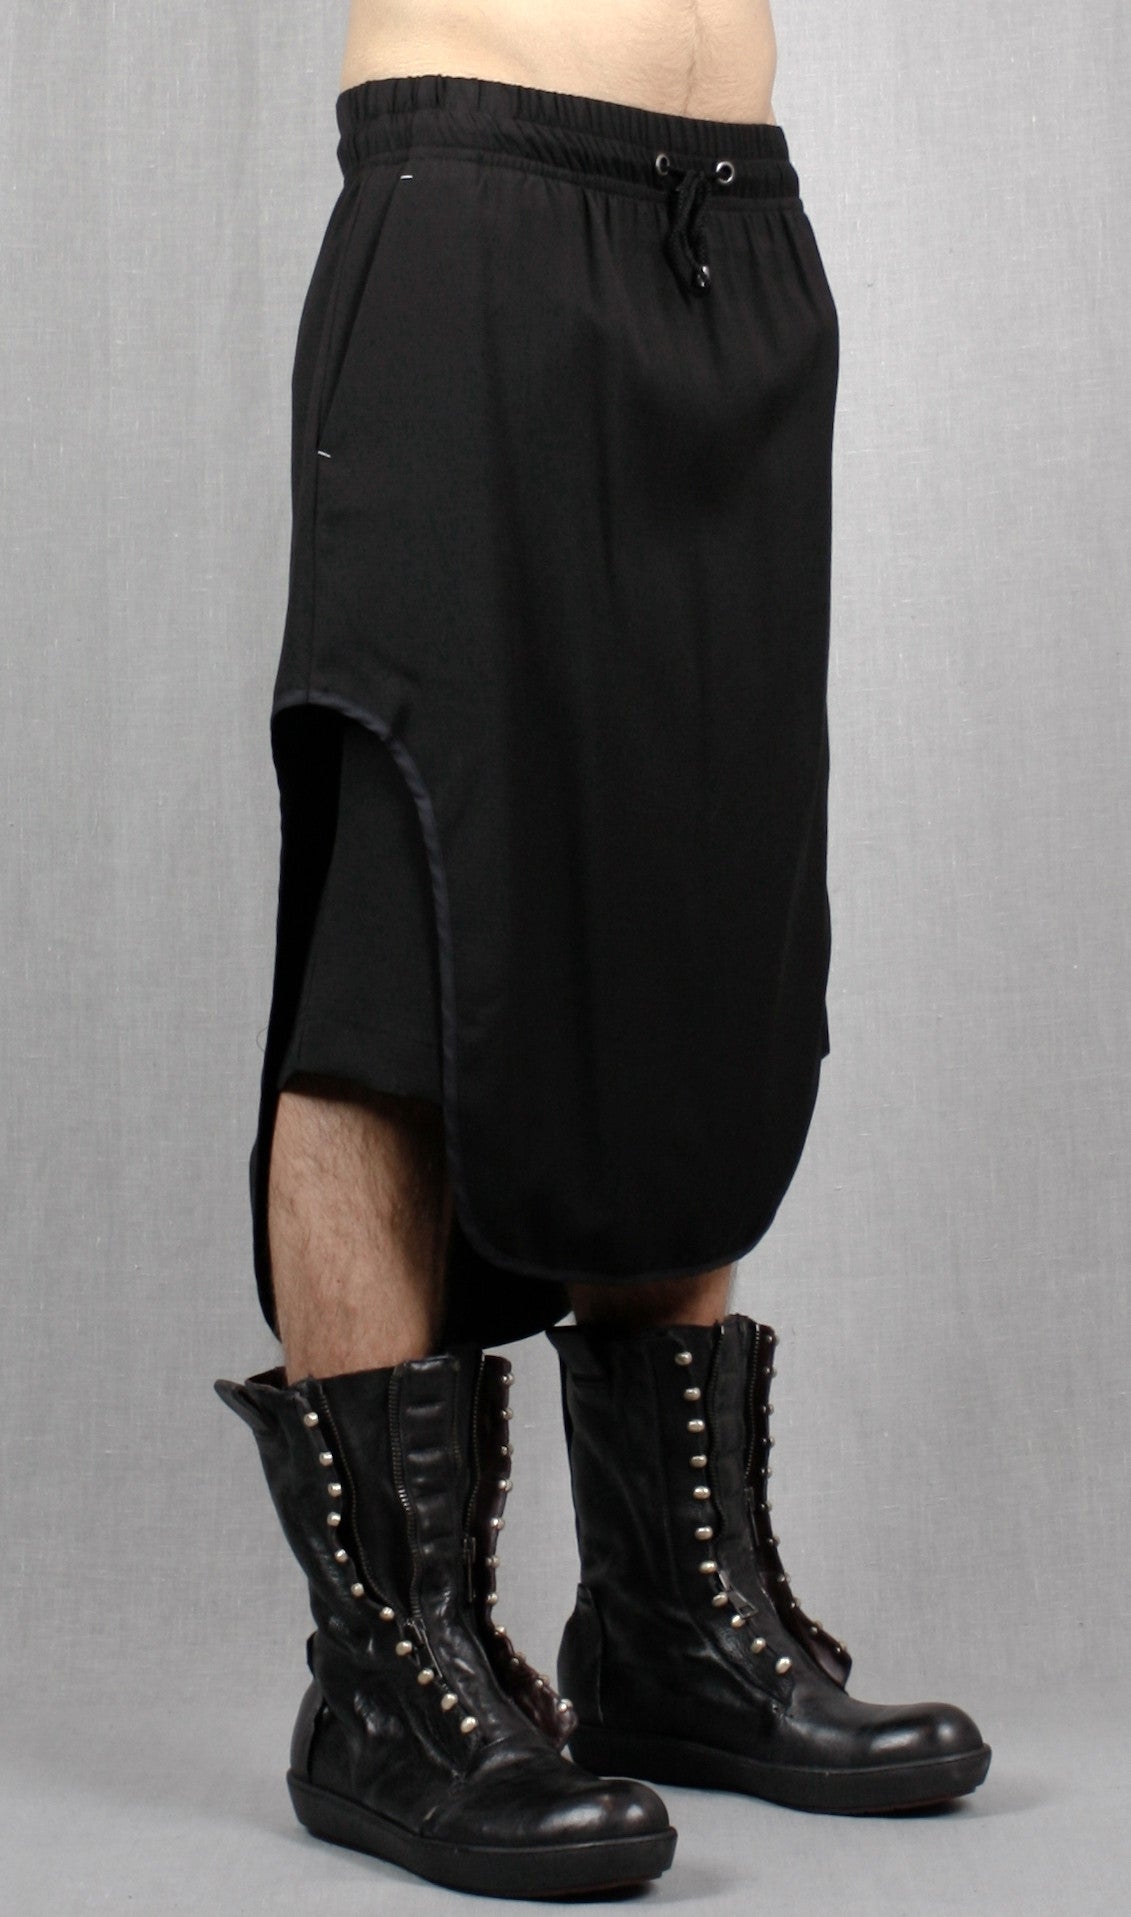 Black Cotton Jersey Short Pants with Leather Trimmed Sides